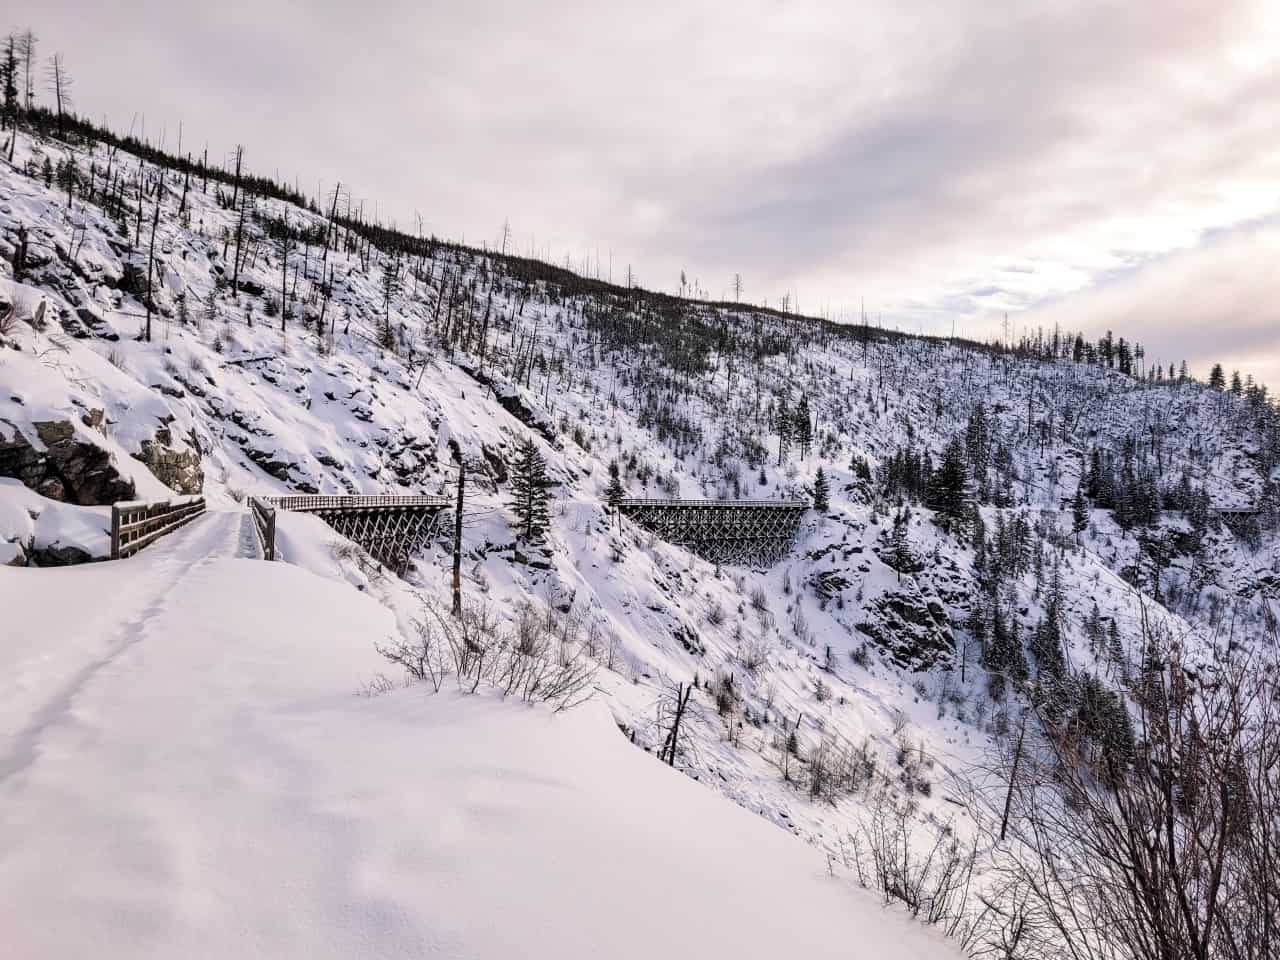 Myra Canyon Trestle - Located 30 minutes from Kelowna, this easy 12 km (one-way) leads you through 12 tunnels and 18 trestles